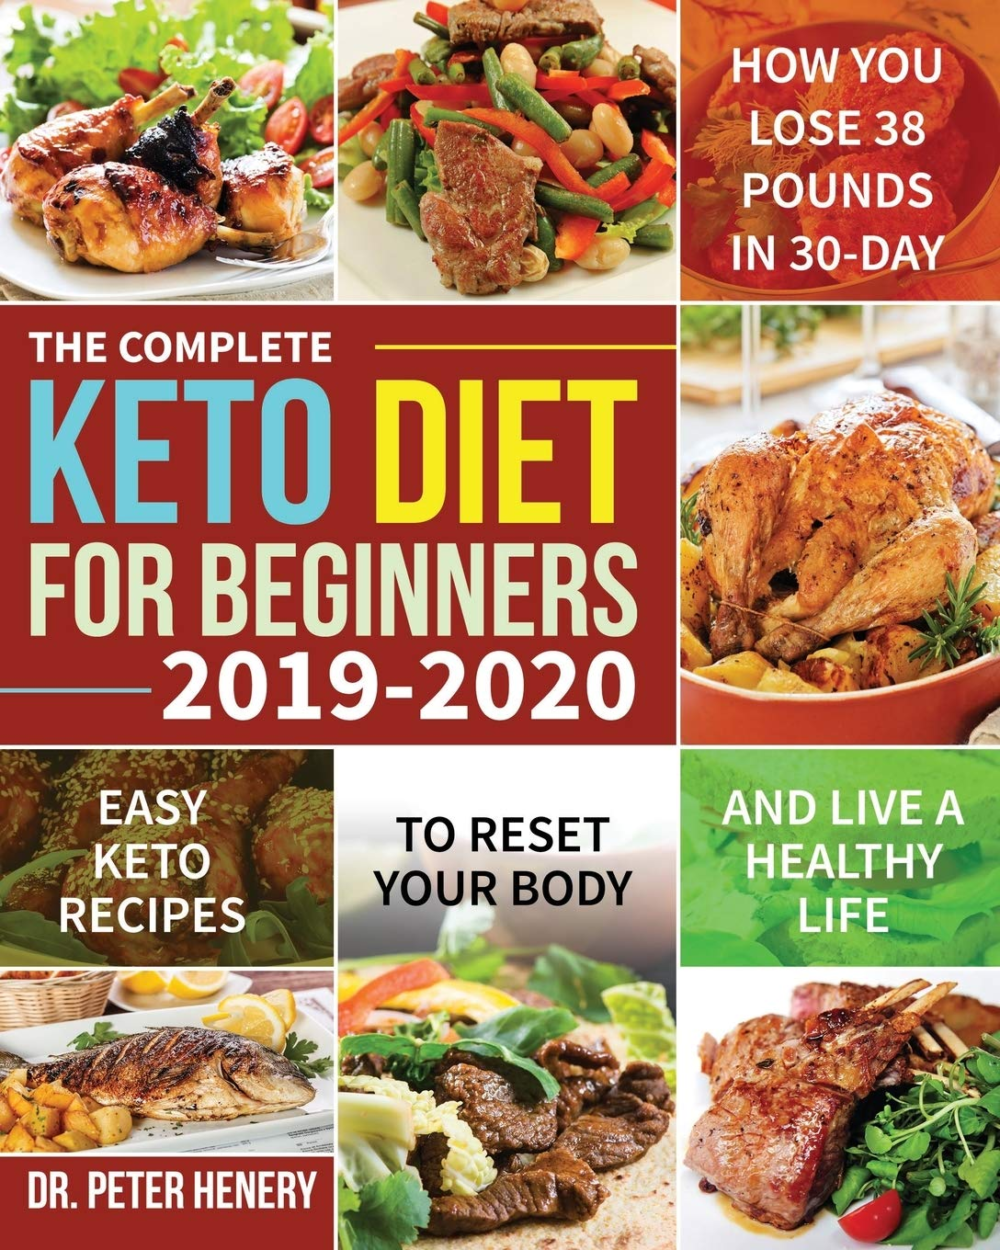 the complete keto diet for beginners 2019 2020: easy keto recipes to reset your body and live a healthy life (how you lose 38 pounds in 30 day)